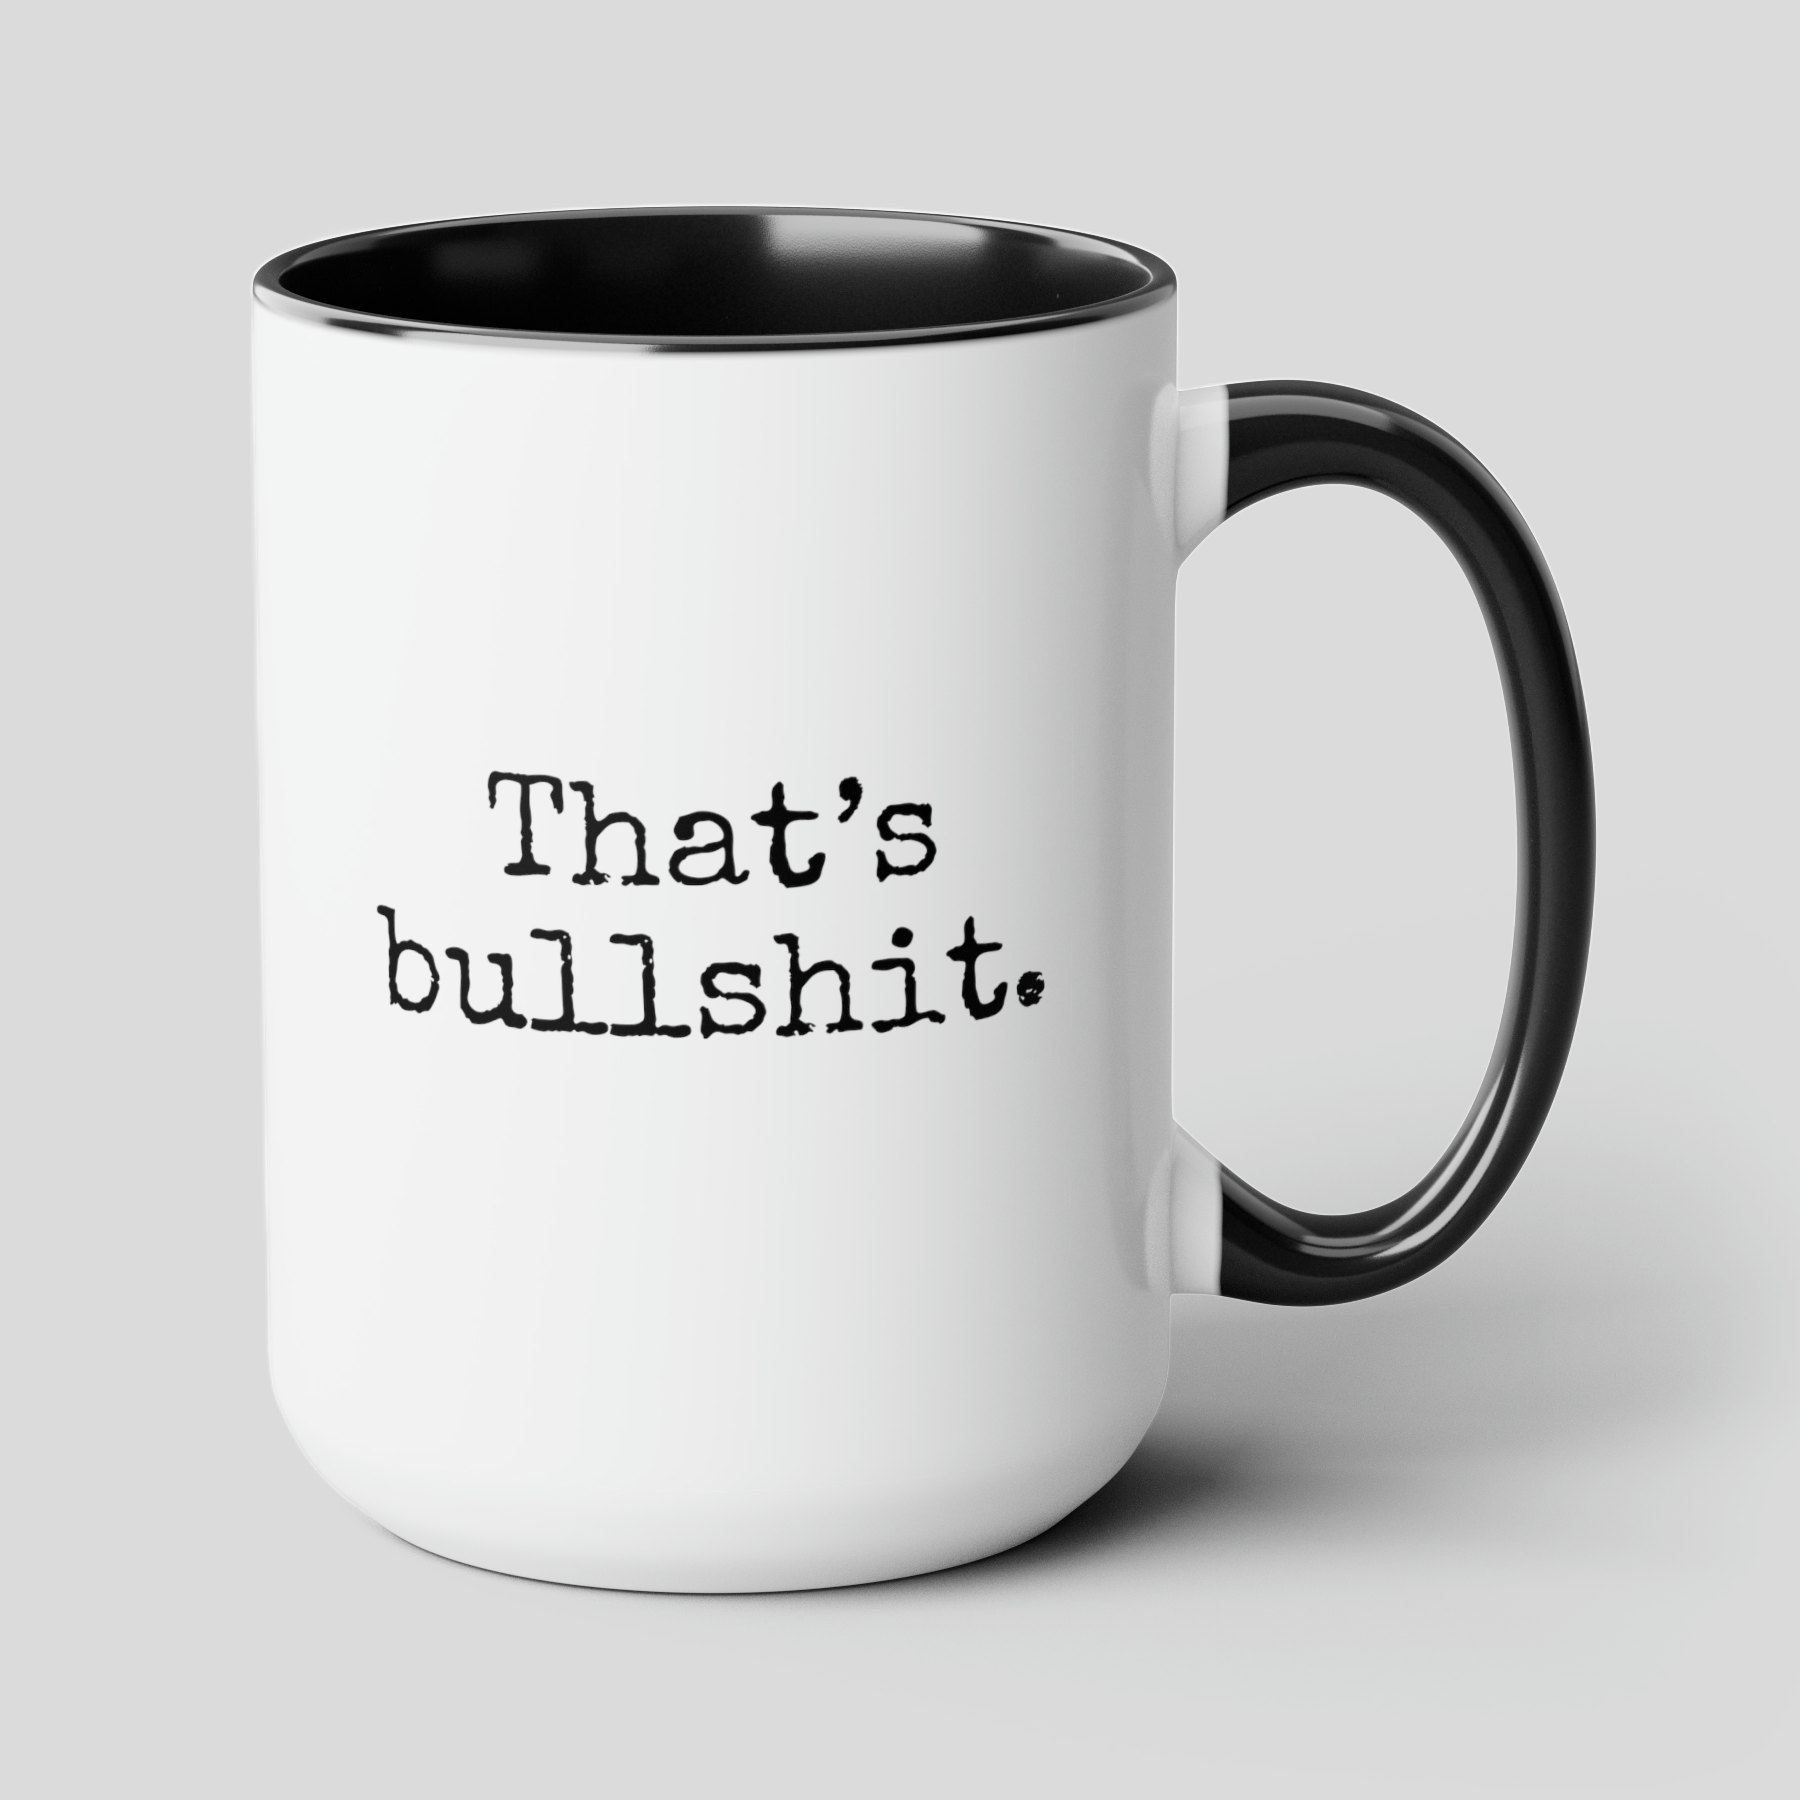 Thats Bullshit 15oz white with black accent funny large coffee mug gift for secret santa colleague coworker mate curse rude humor waveywares wavey wares wavywares wavy wares cover